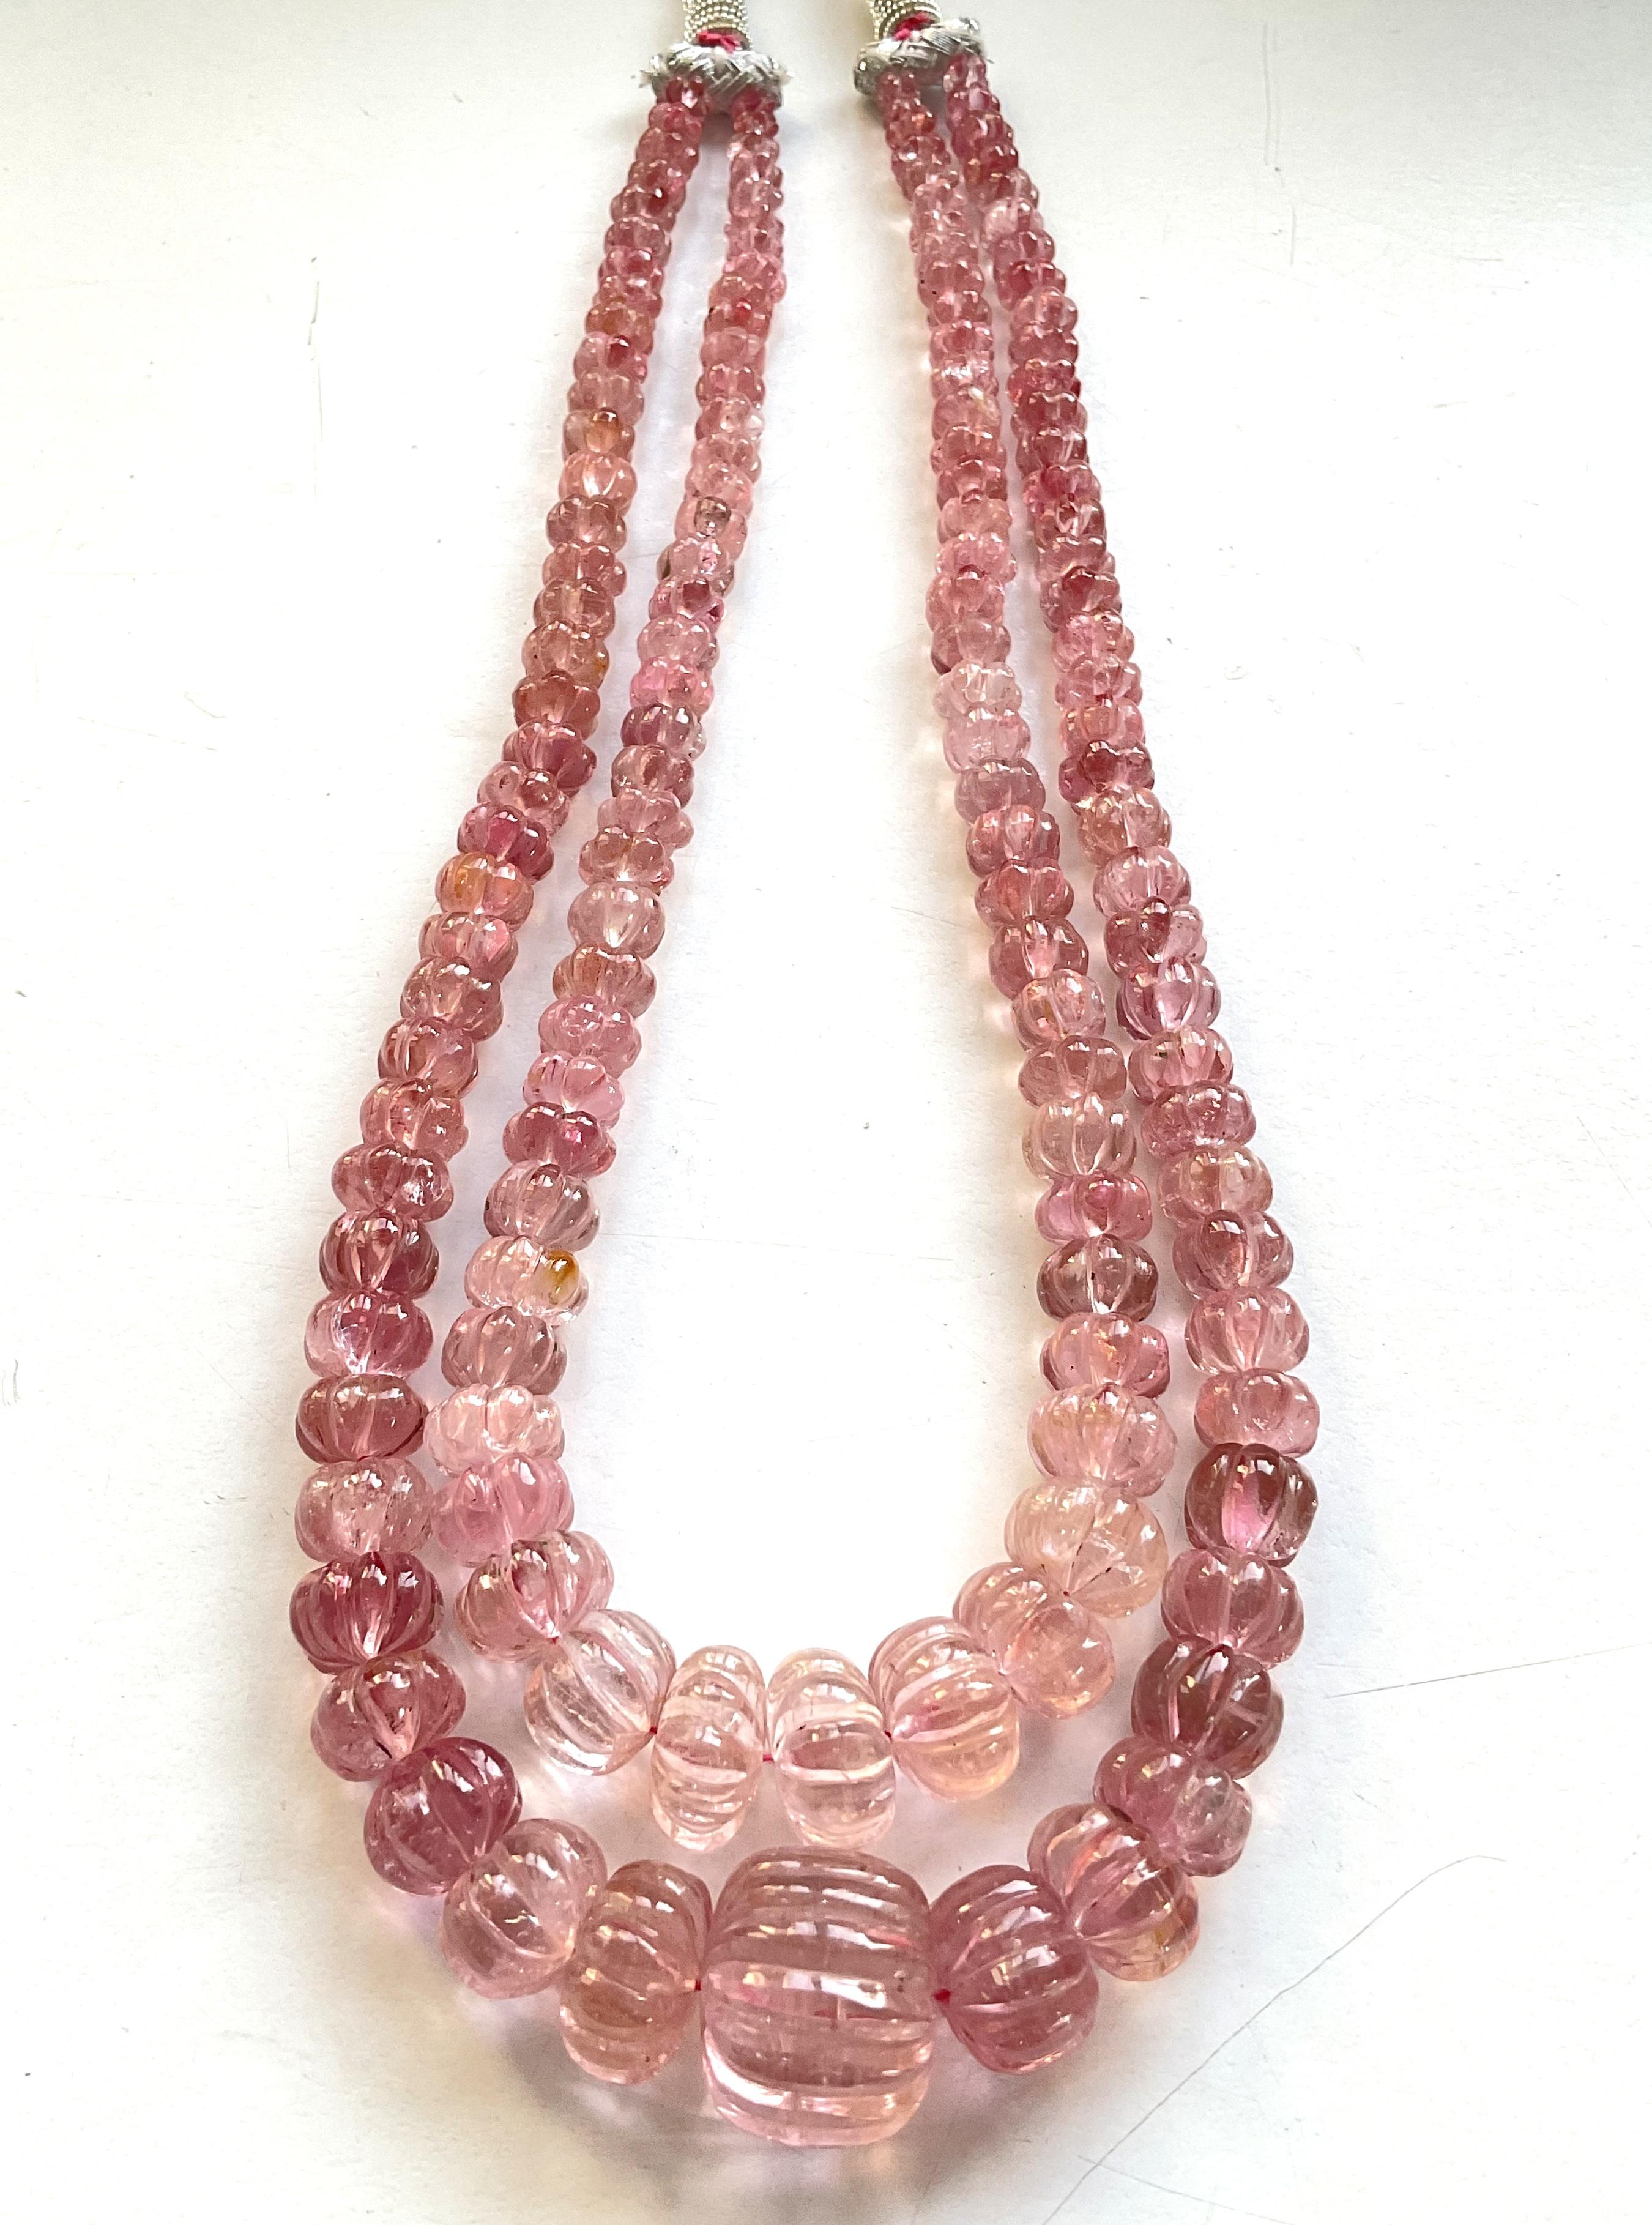 396.95 Carats pink Tourmaline carved melon beads necklace Jewelry Natural Gem For Sale 2